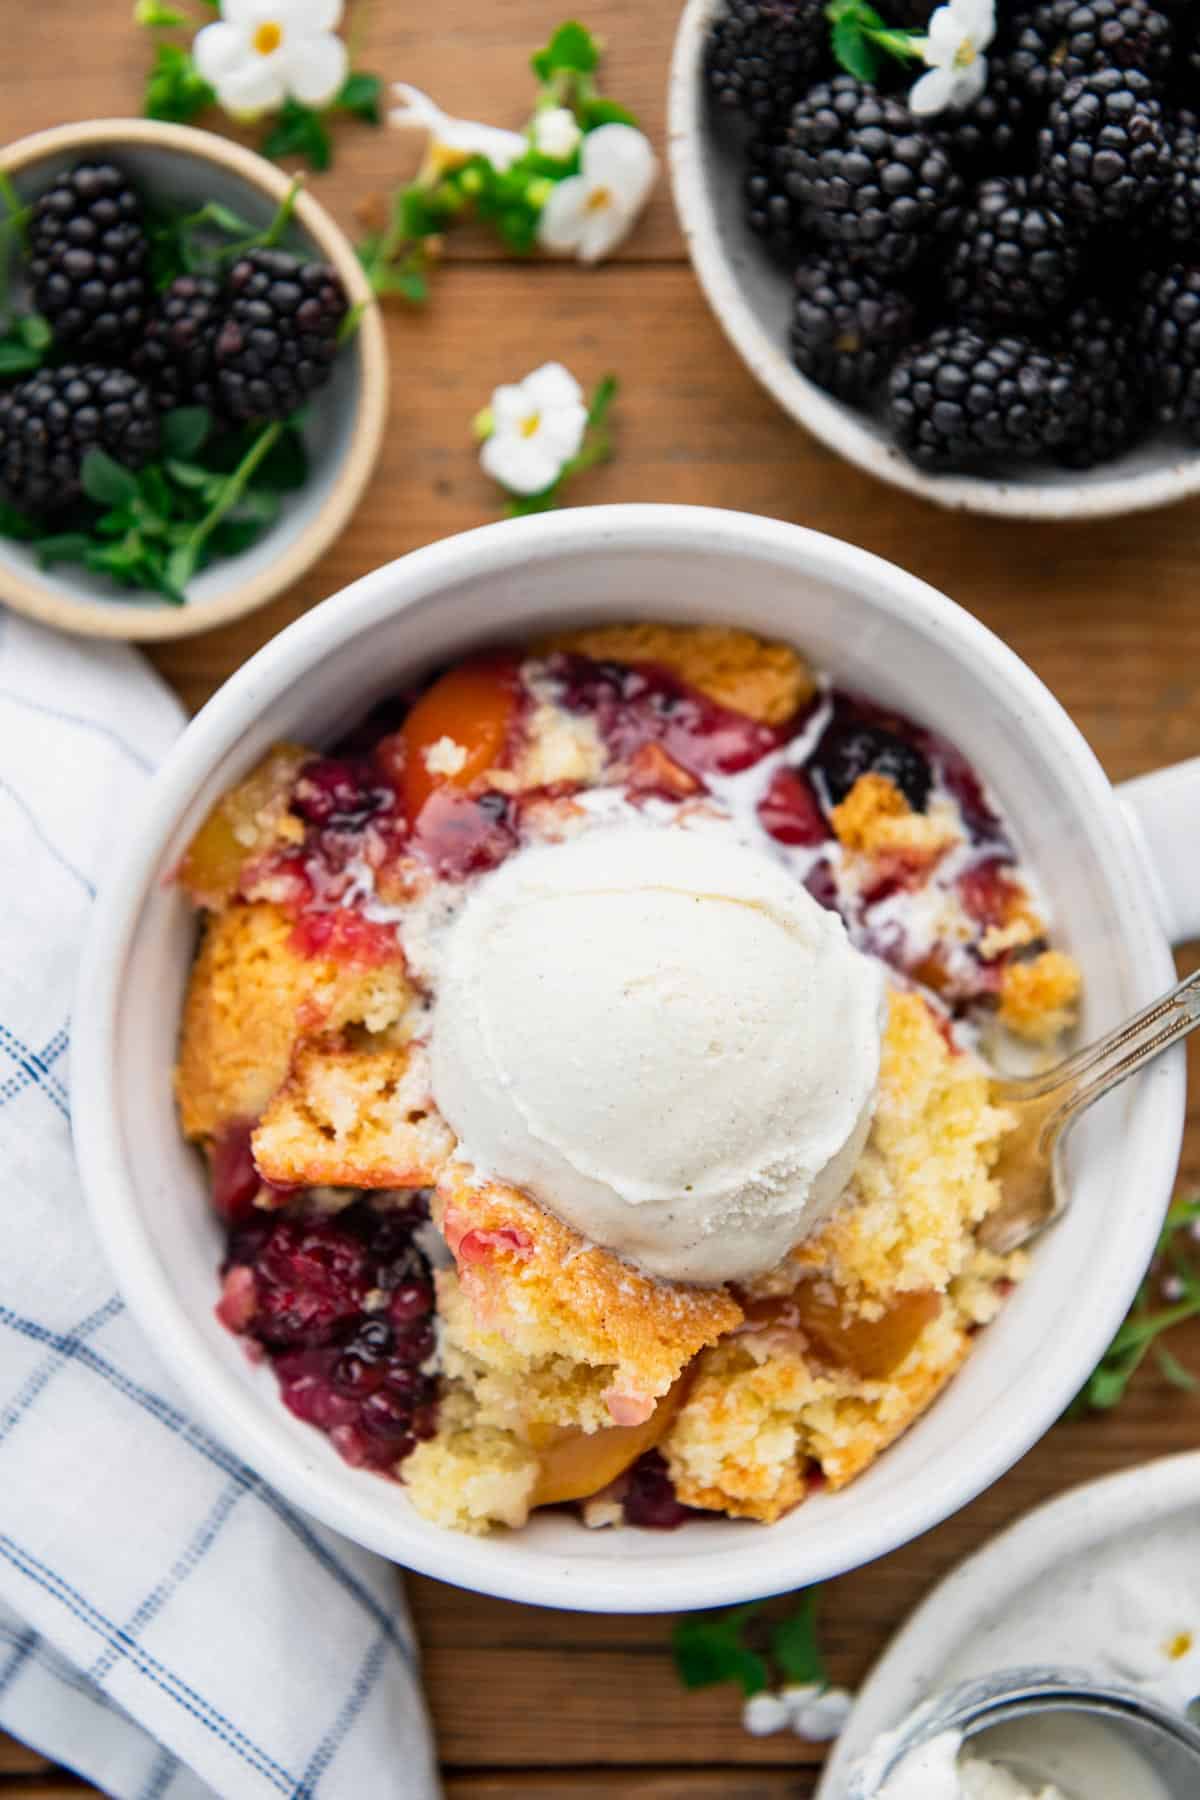 Overhead image of a white bowl full of southern blackberry and peach cobbler with a scoop of vanilla ice cream on top.